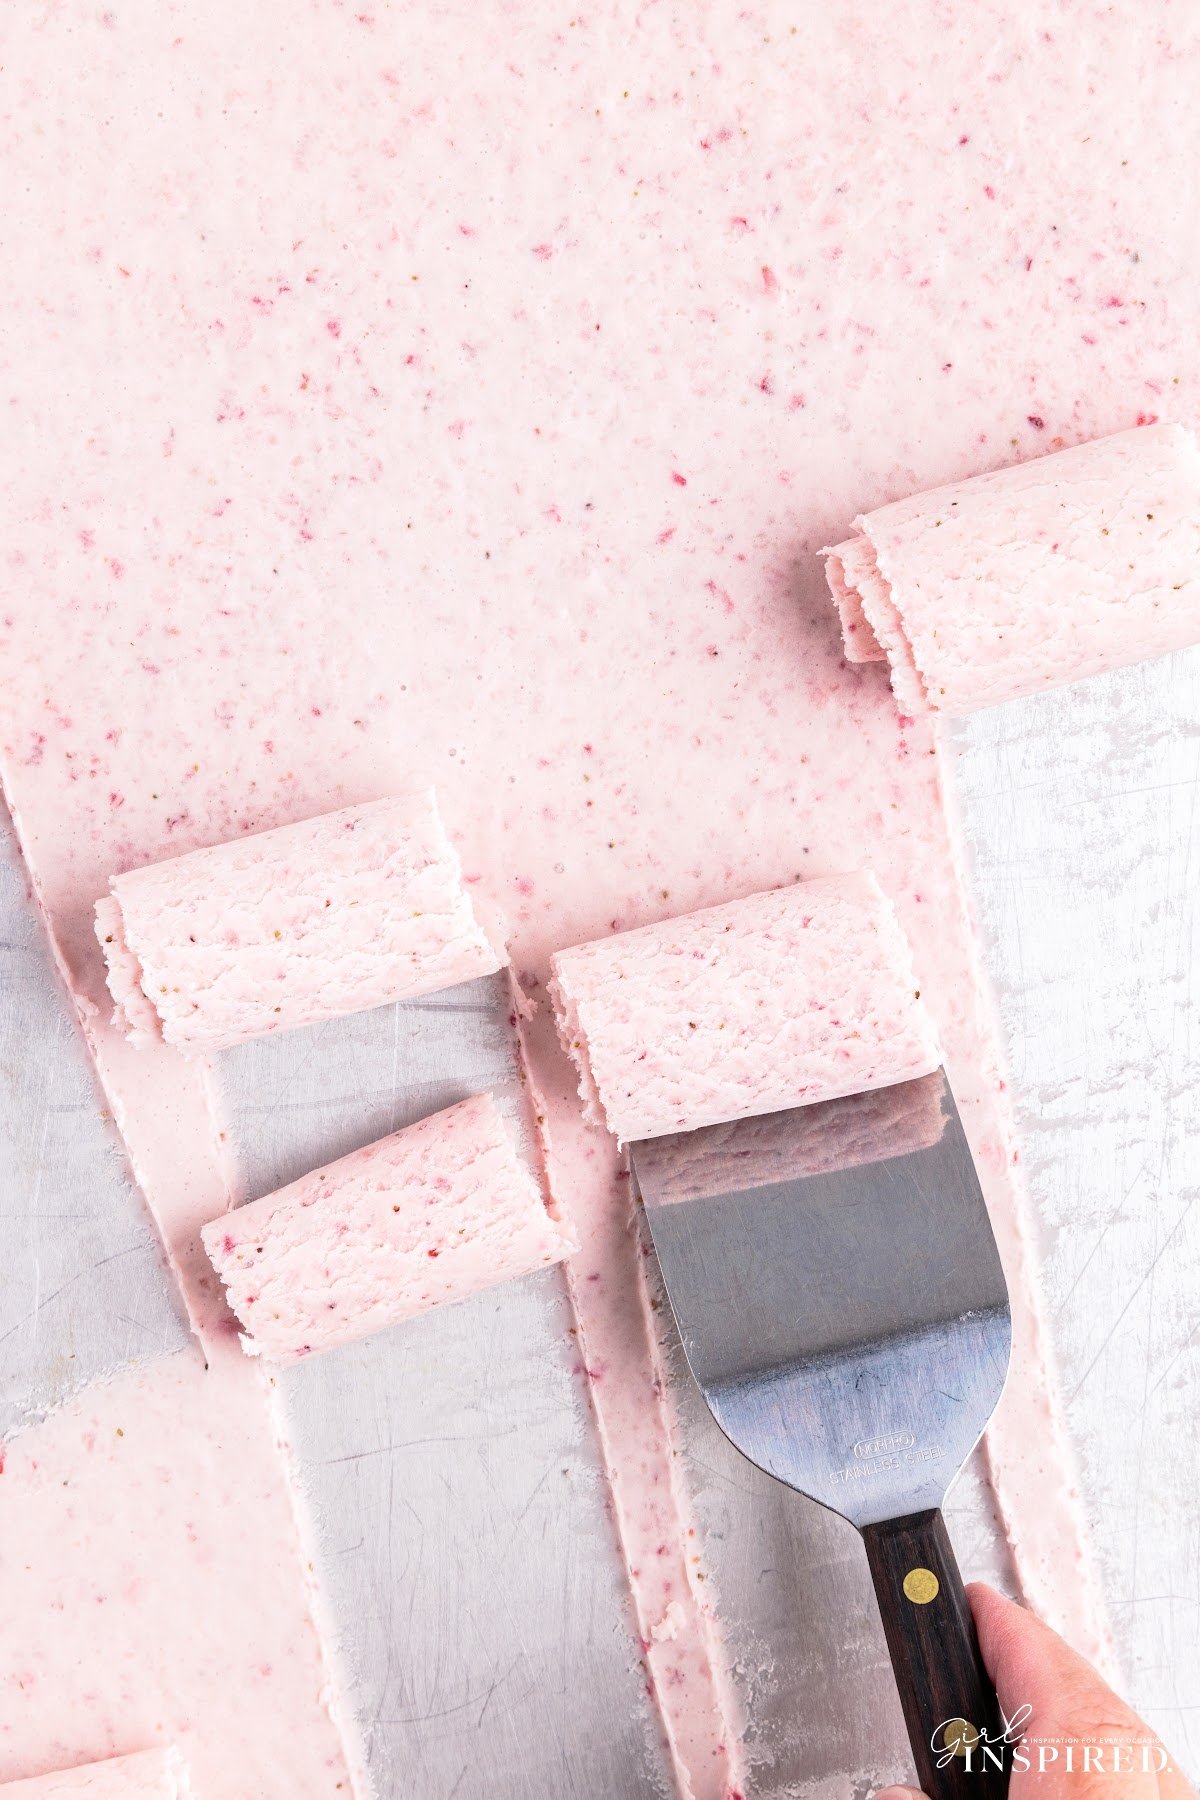 Spatula scraping rolls of strawberry rolled ice cream on a quarter sheet pan.